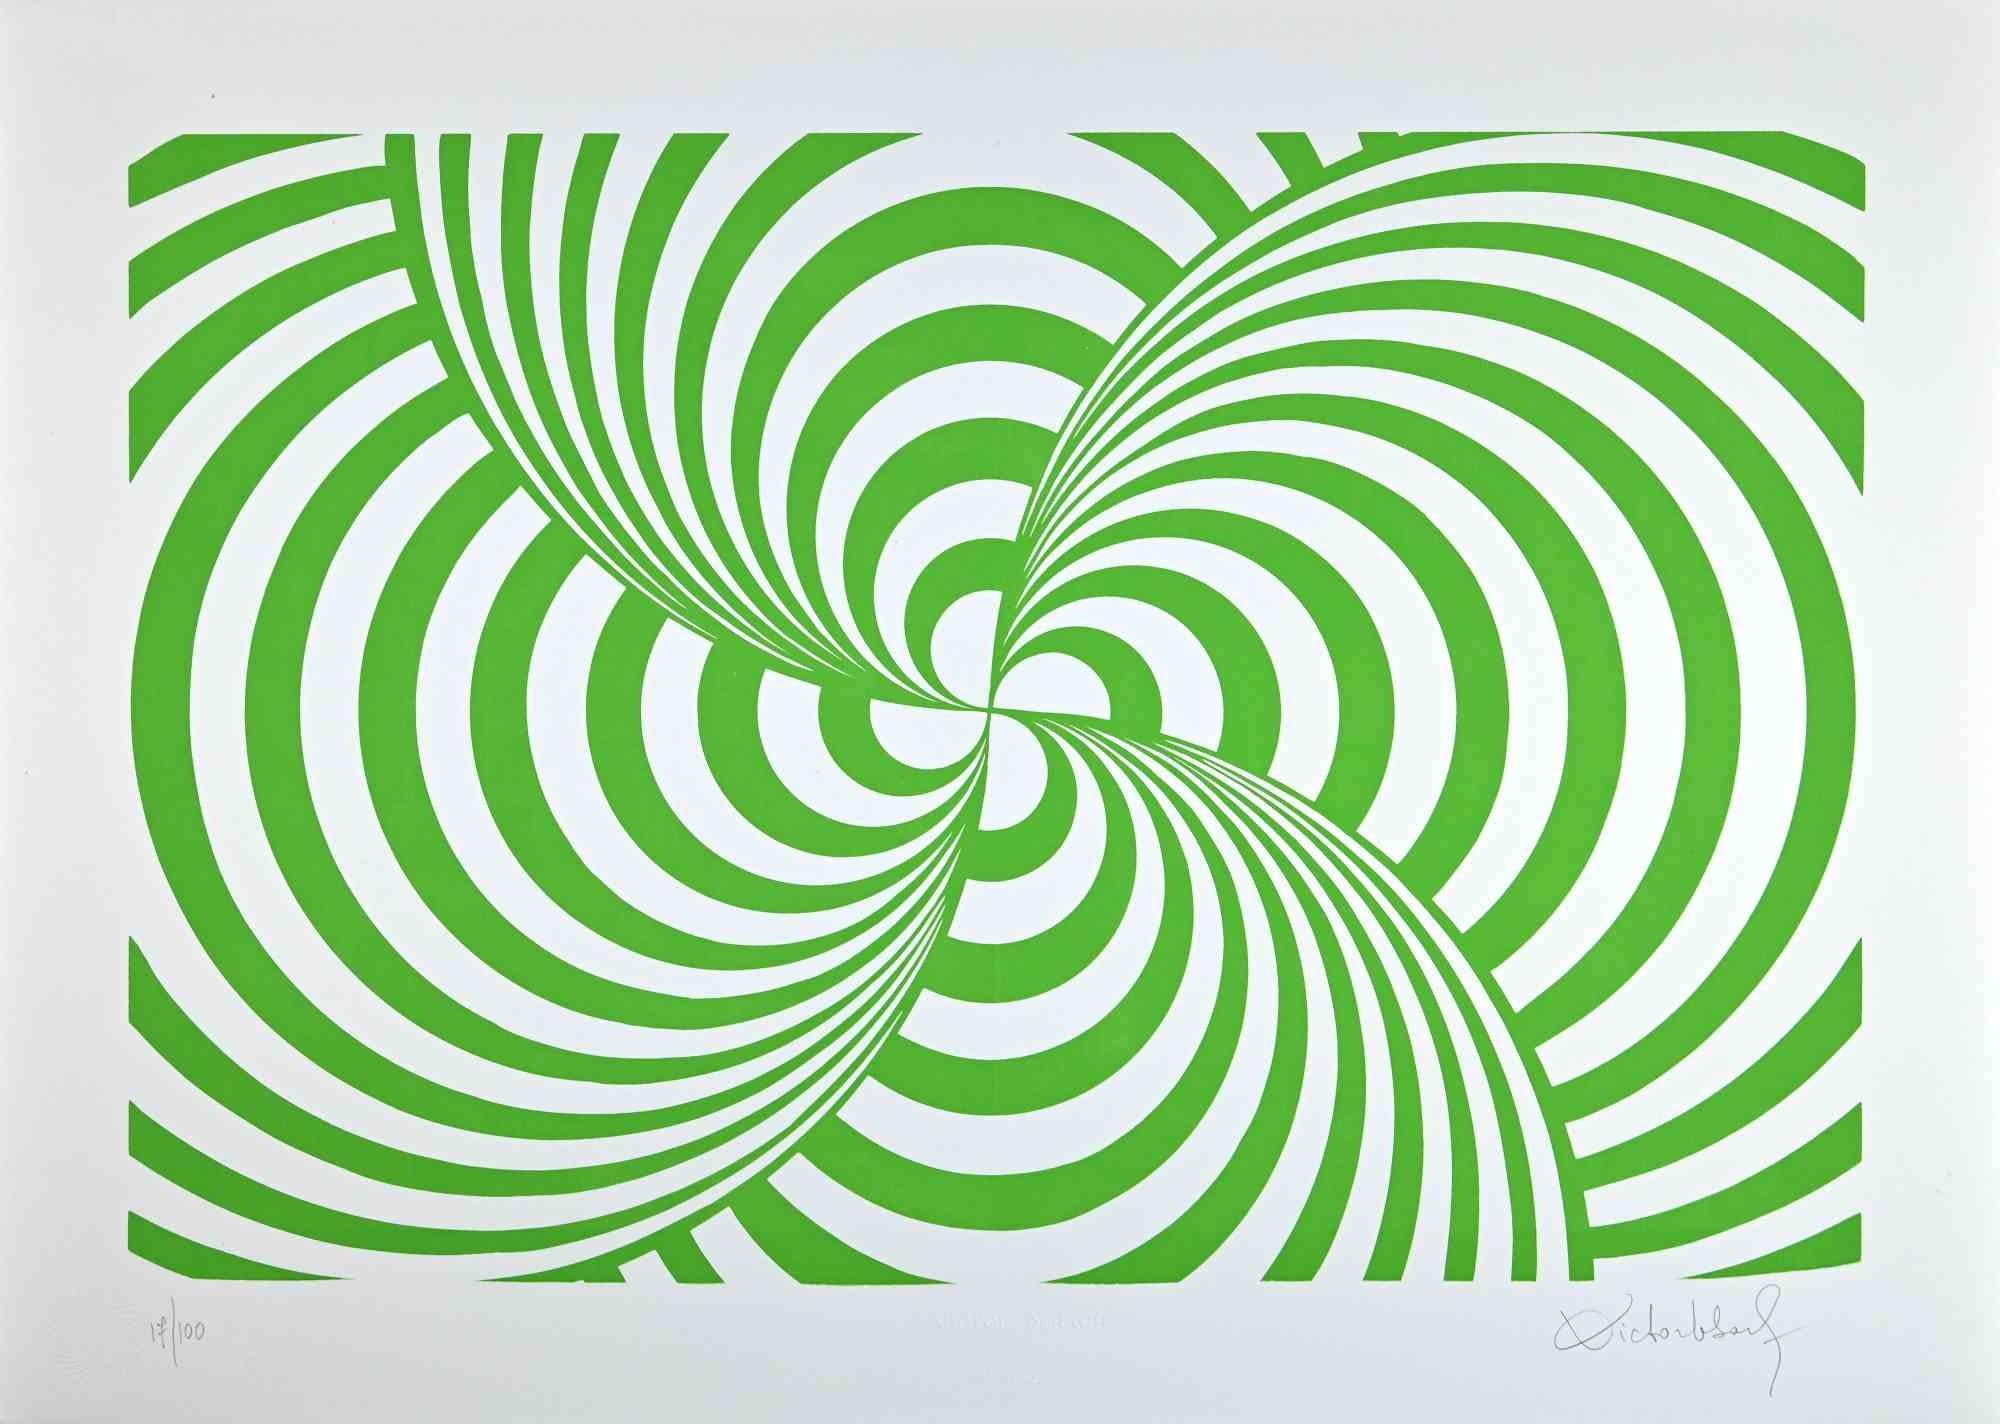 Abstract Green Composition is a Screen Print on Paper realized by Victor Debach in 1970s.

Limited edition of 100 copies numbered and signed by the artist with pencil on the lower margin. 

Edition 17/100

Good condition on white cardboard.

 